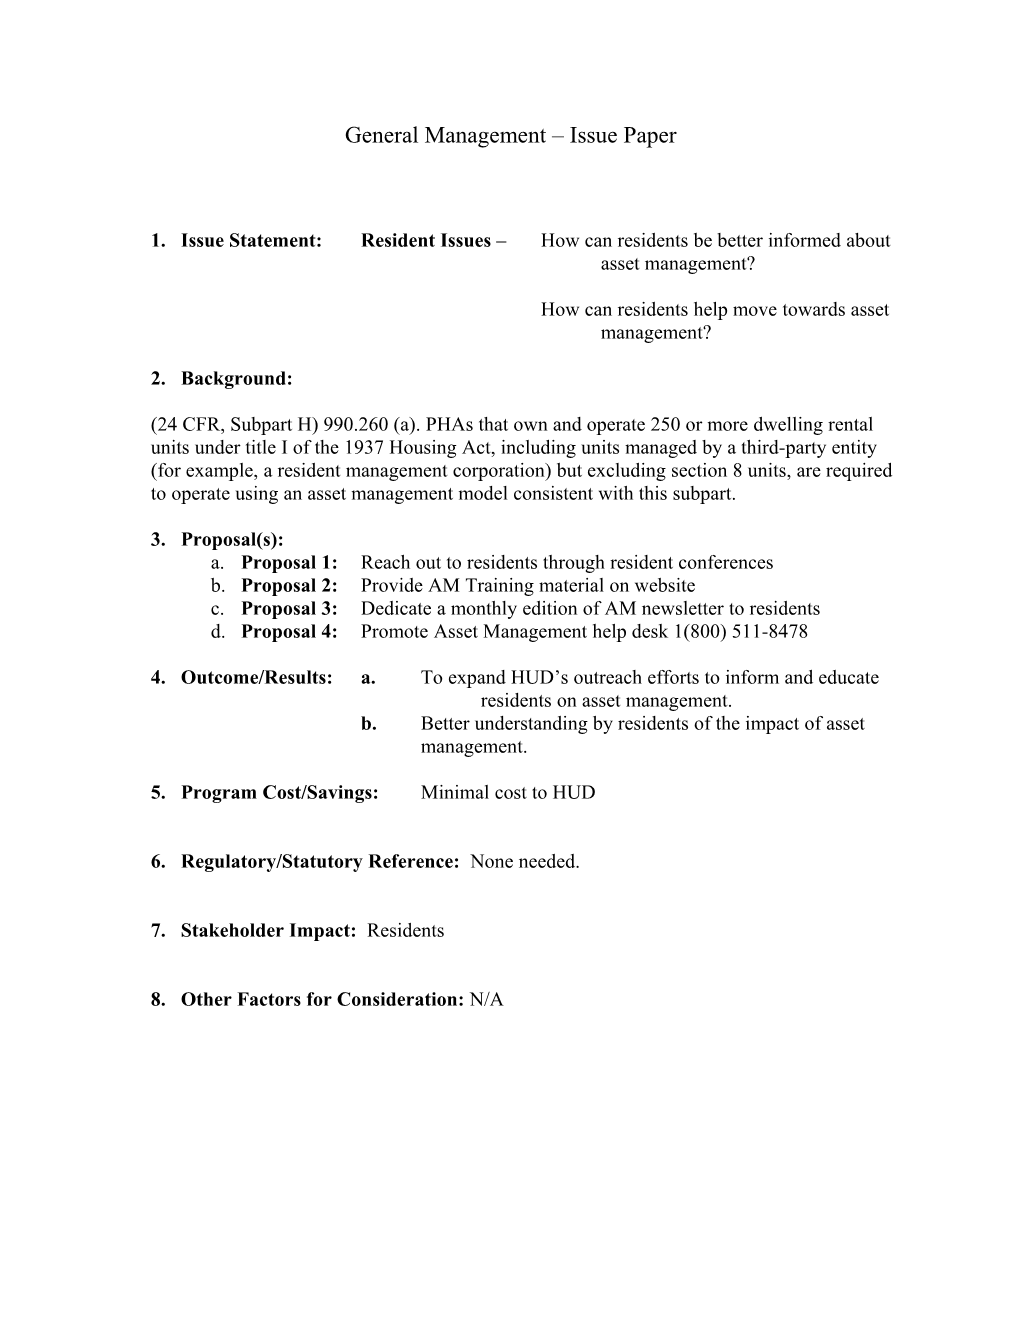 General Management Issue Paper